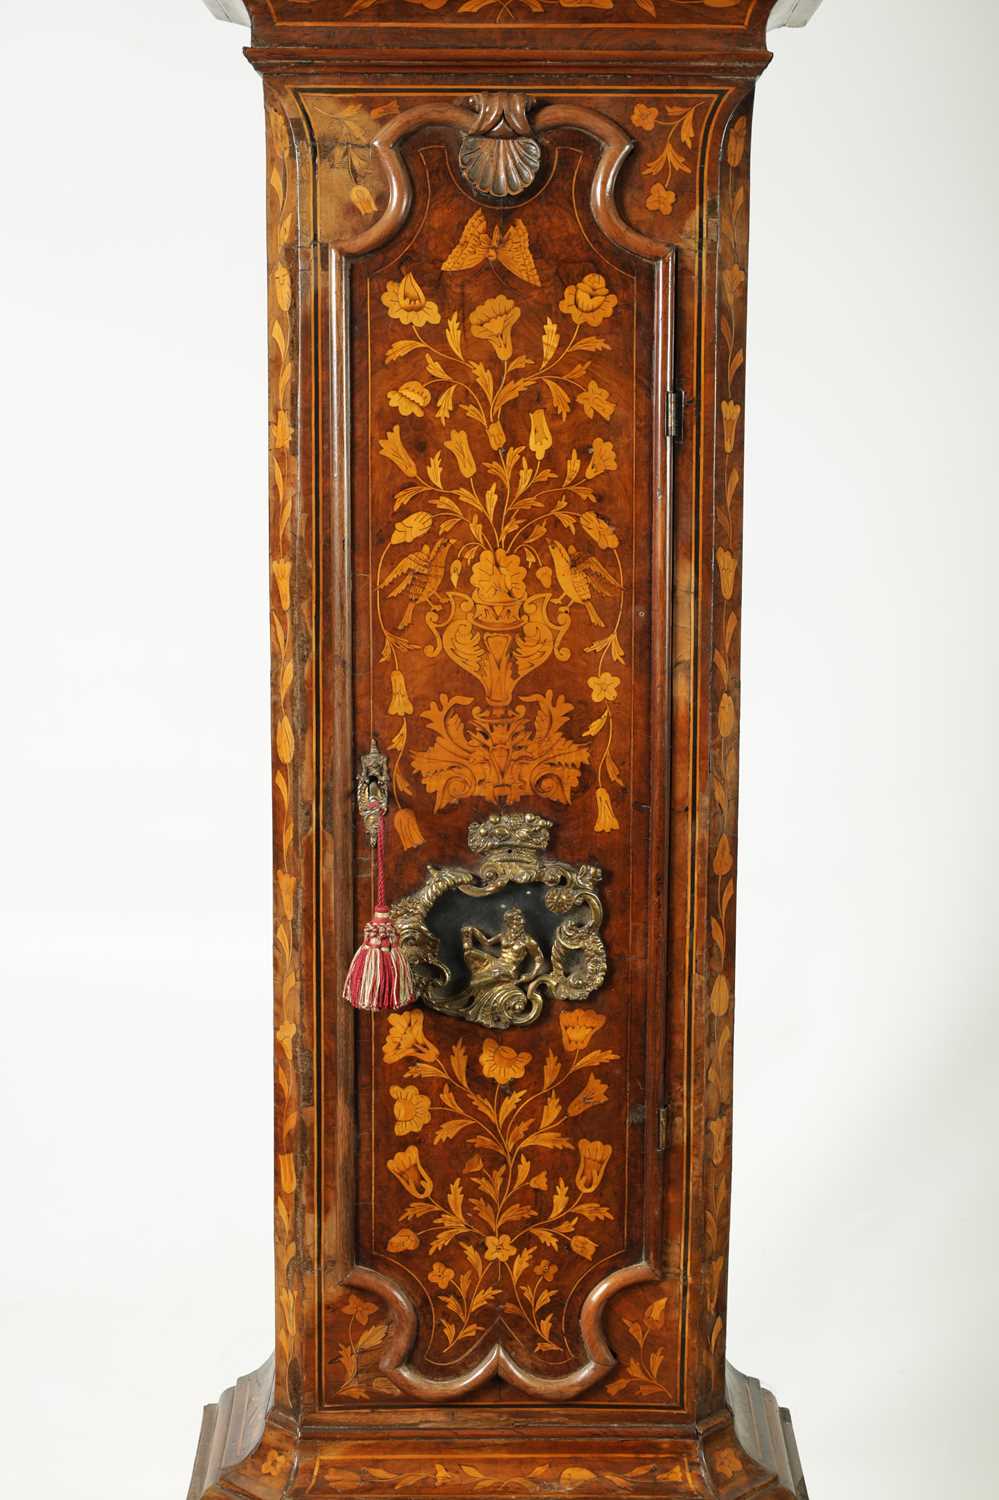 JOHN MARRIOTT, LONDON. A FINE 18TH CENTURY WALNUT AND DUTCH MARQUETRY 8-DAY LONG CASE CLOCK - Image 4 of 13